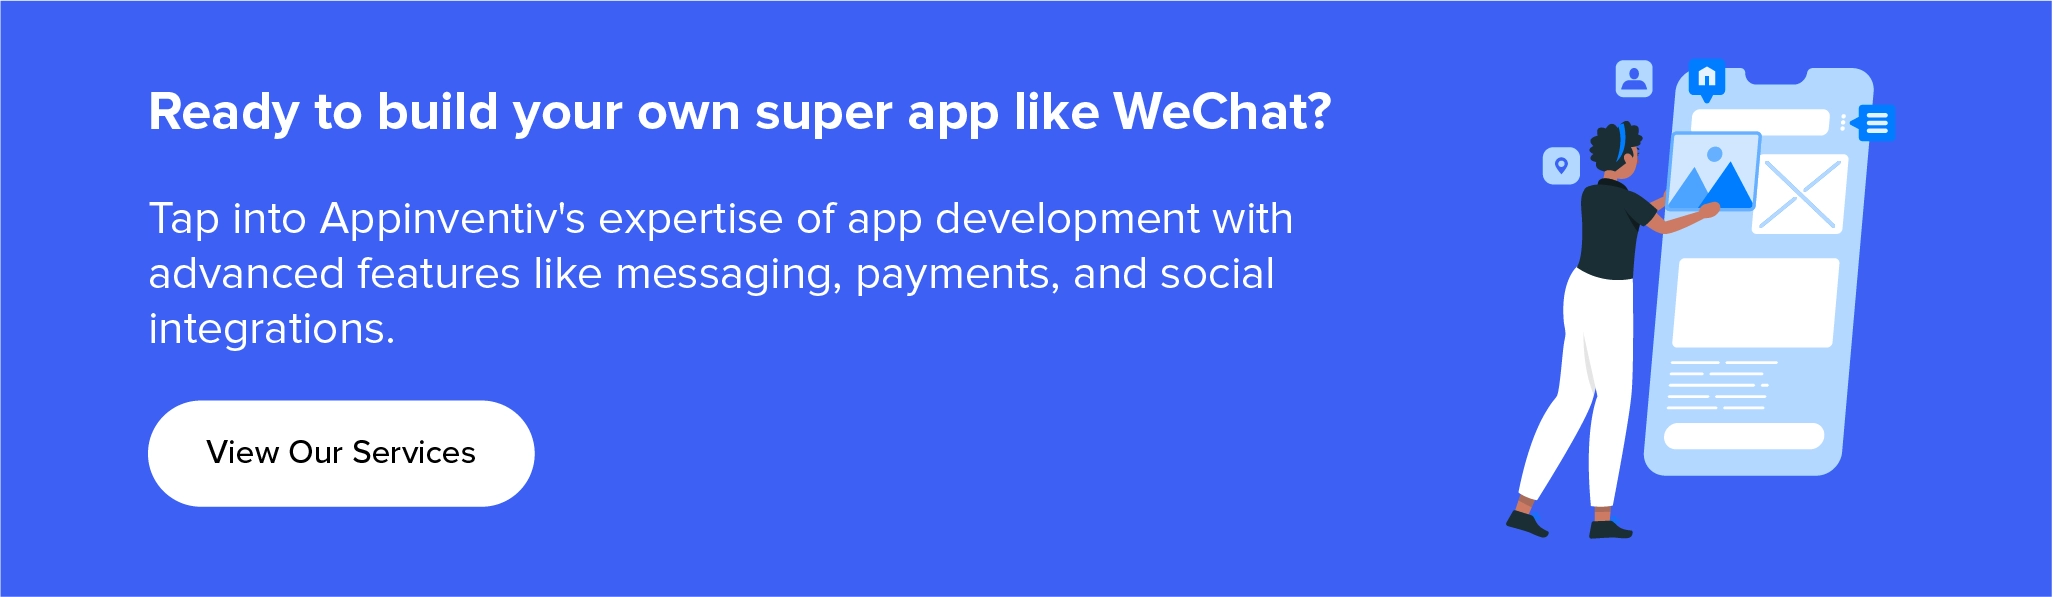 Partner with us to build a super app like WeChat